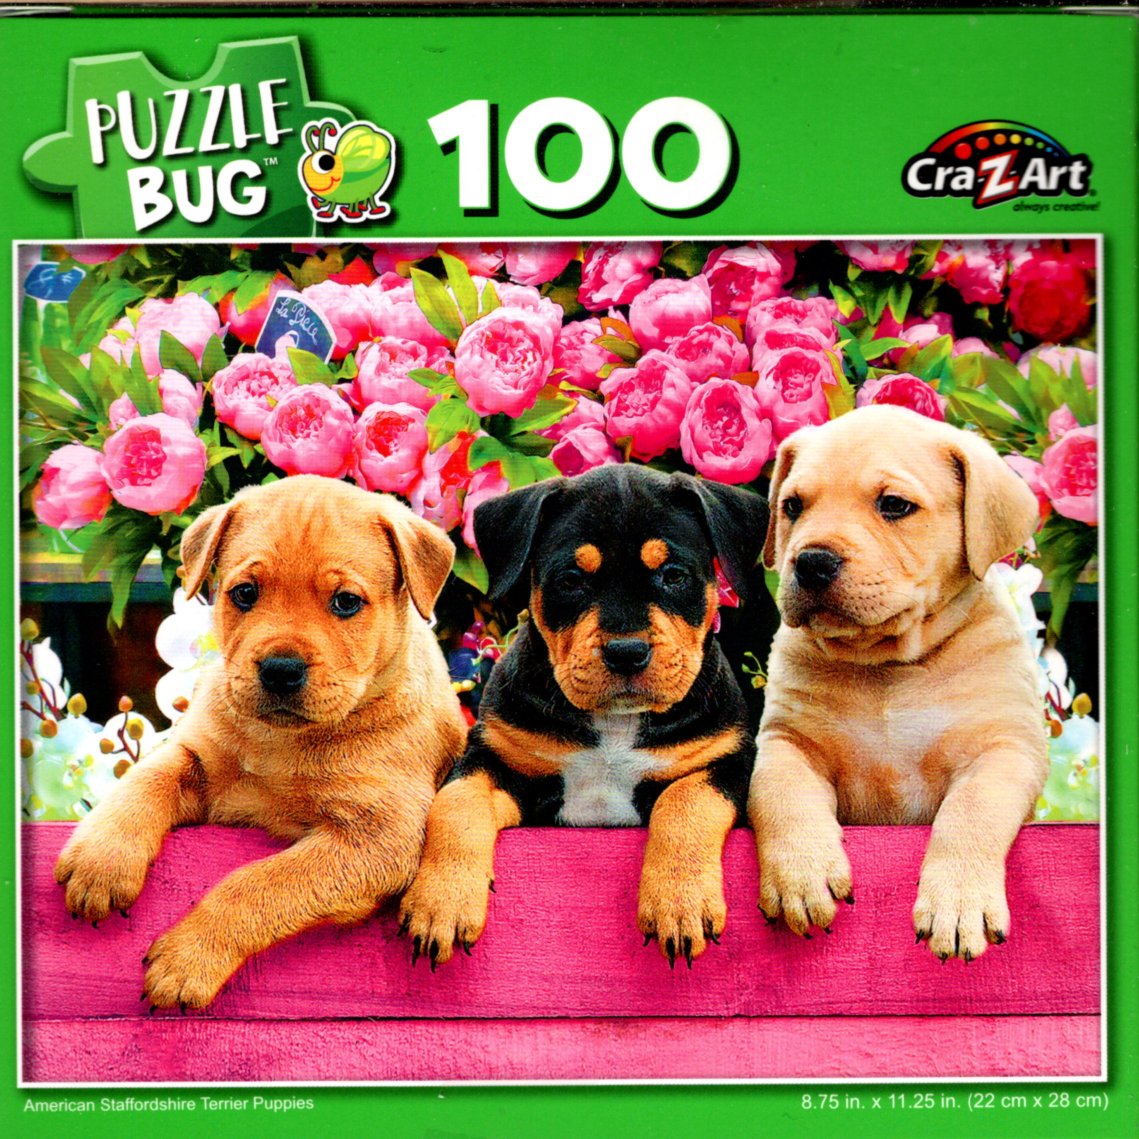 American Staffordshire Terrier Puppies - 100 Piece Jigsaw Puzzle